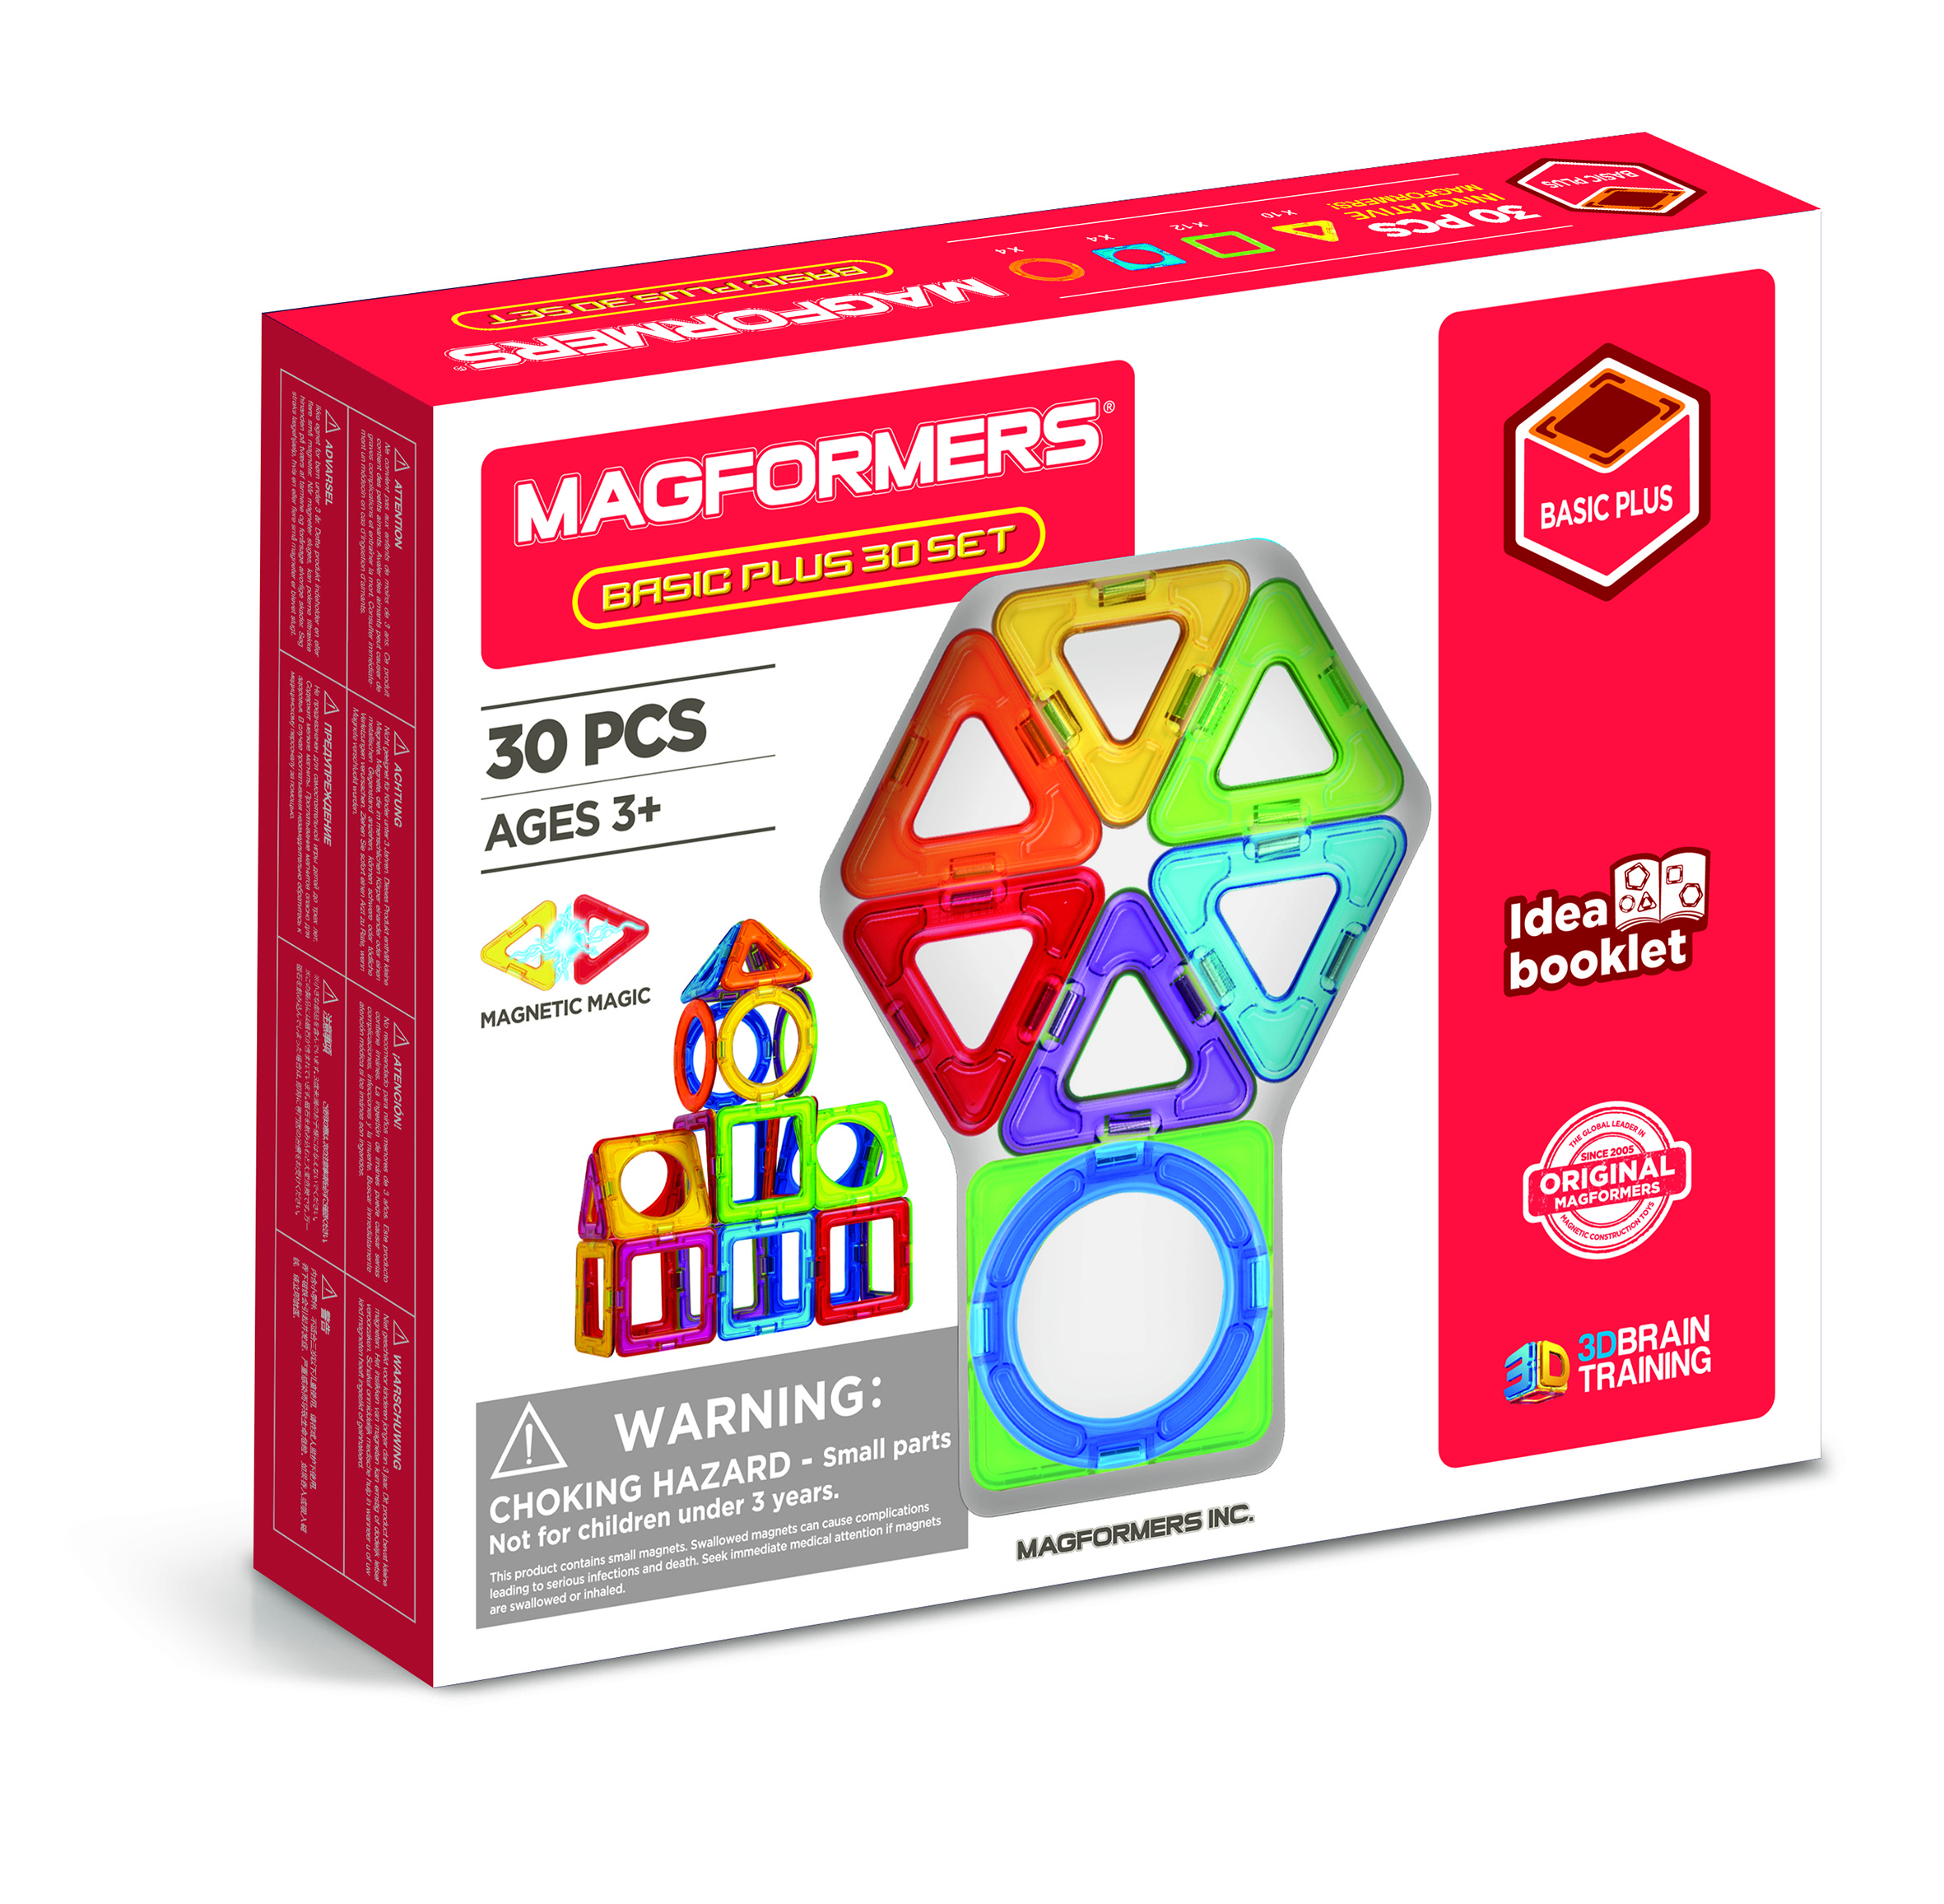 There is a need to Wind Investigation Set magnetic de construit- Magformers Basic Plus 30 set – Podul cu Jucarii